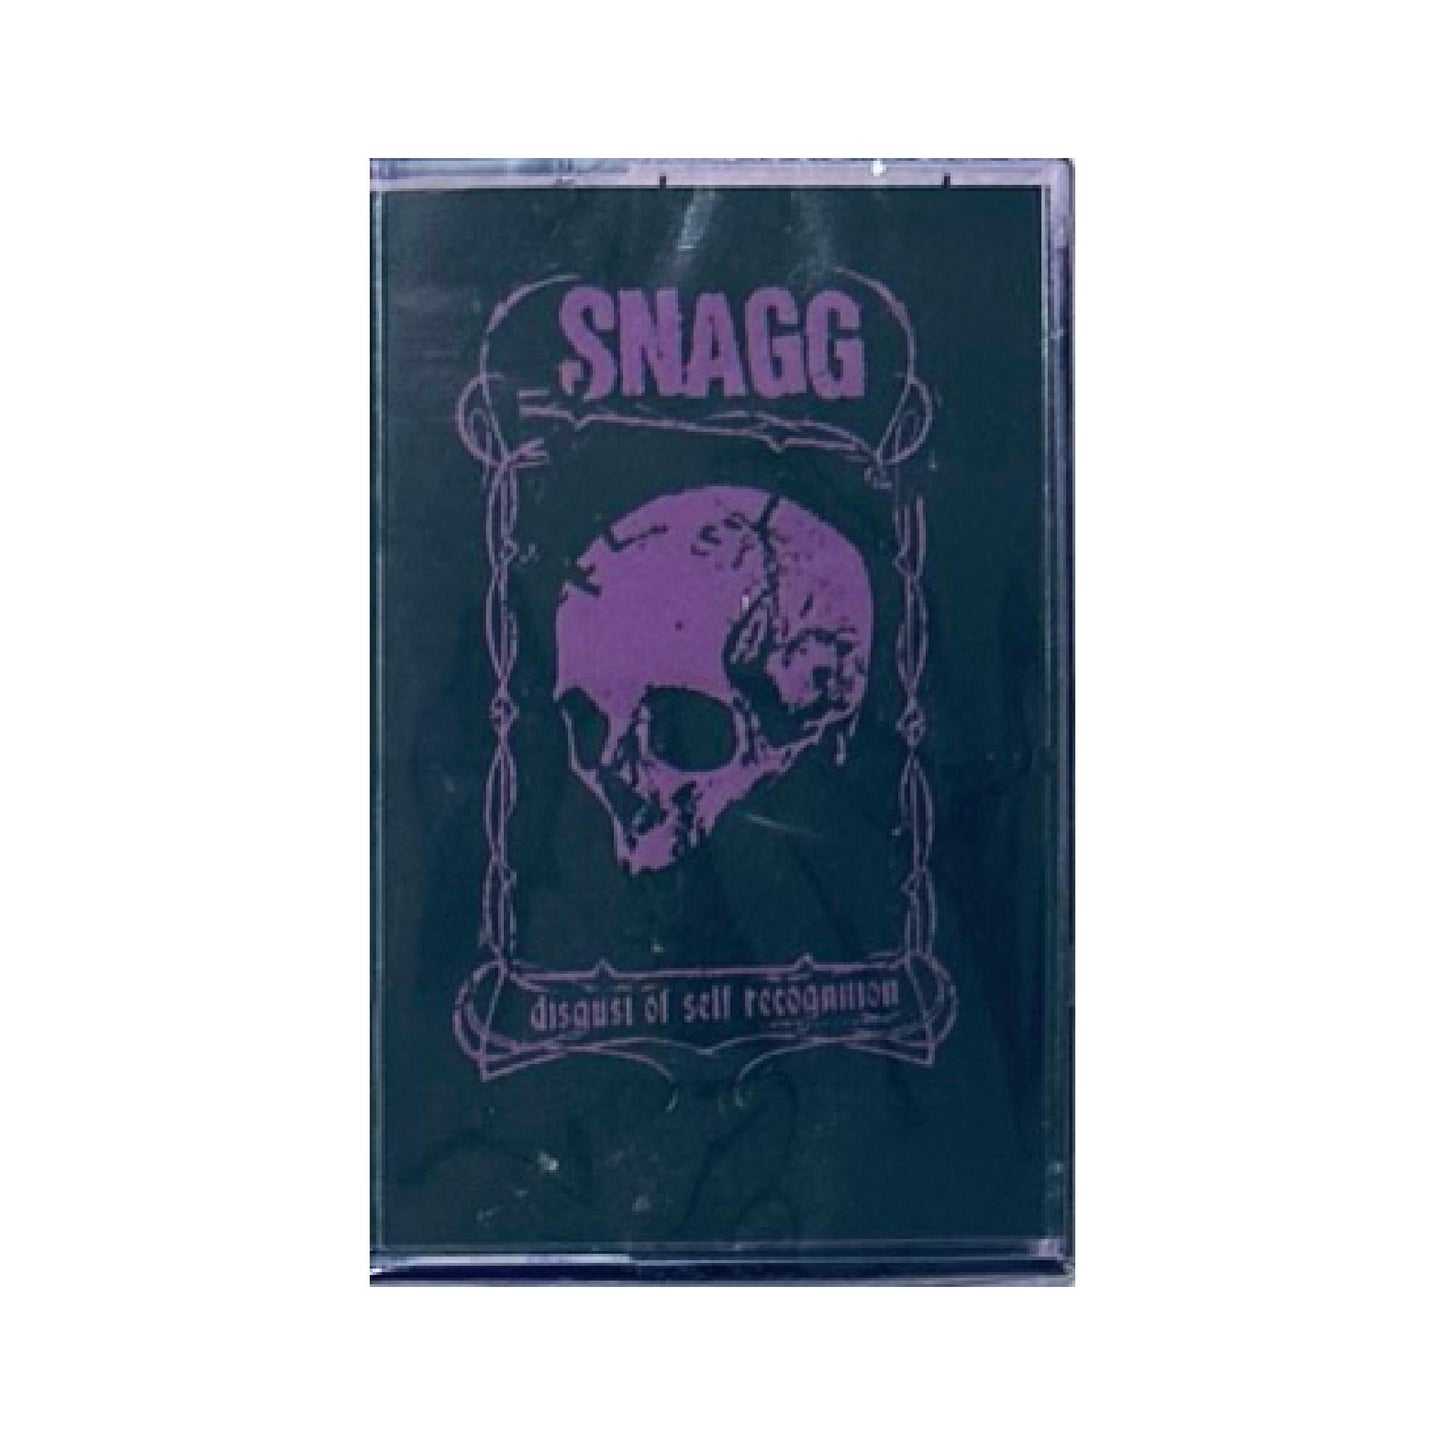 Snagg - Disgust of Self Recognition CS (cassette tape)